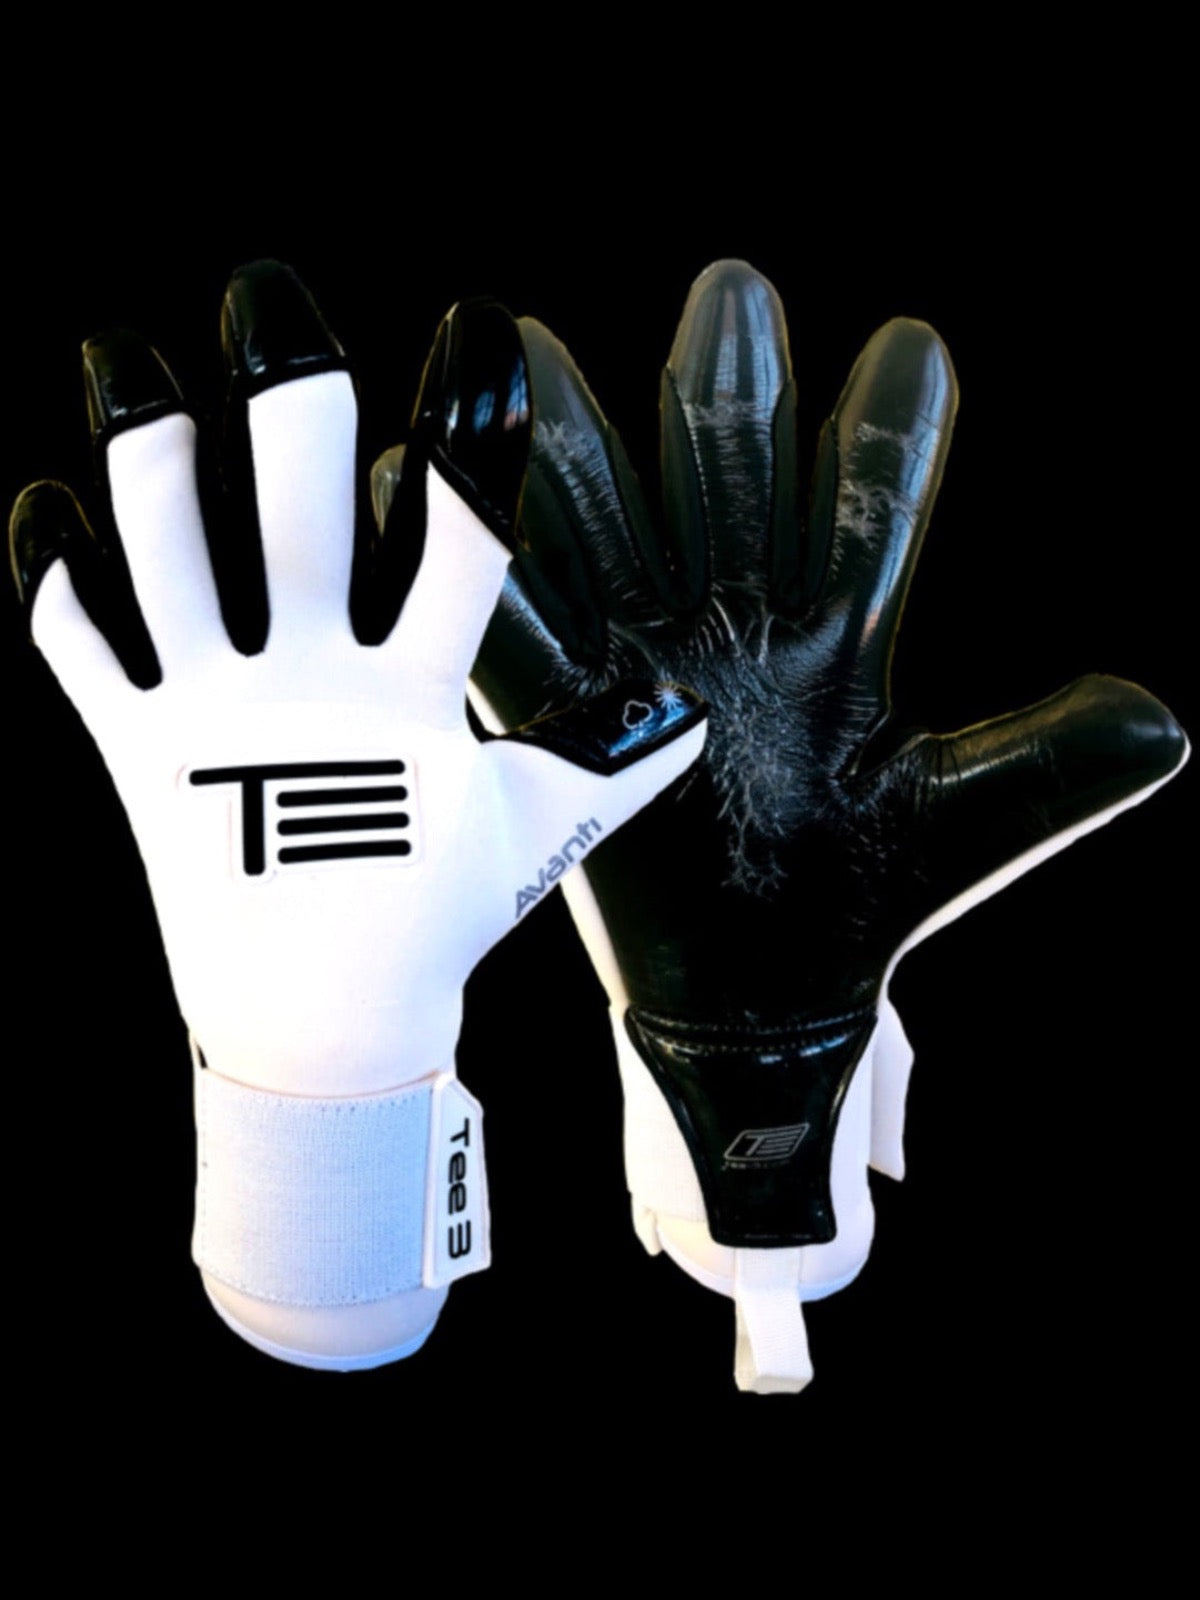 A goalkeeping glove worn by professional goalkeepers